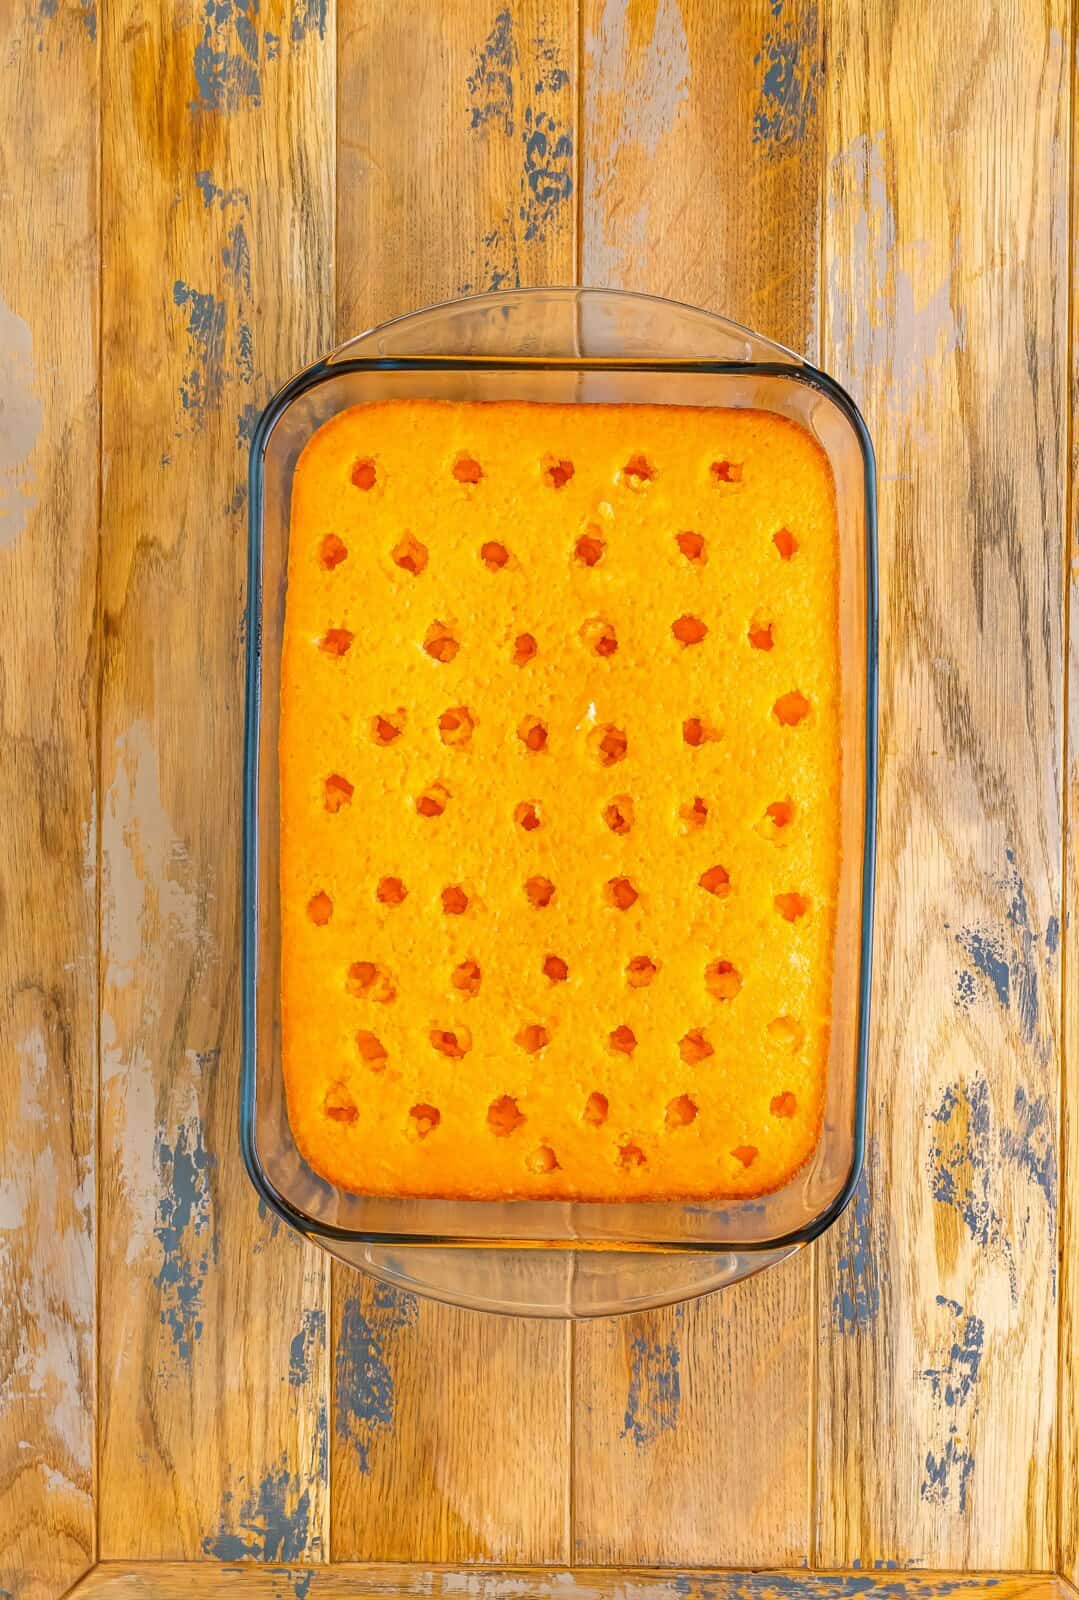 A cake with holes poked in the top and jello poured in the holes.